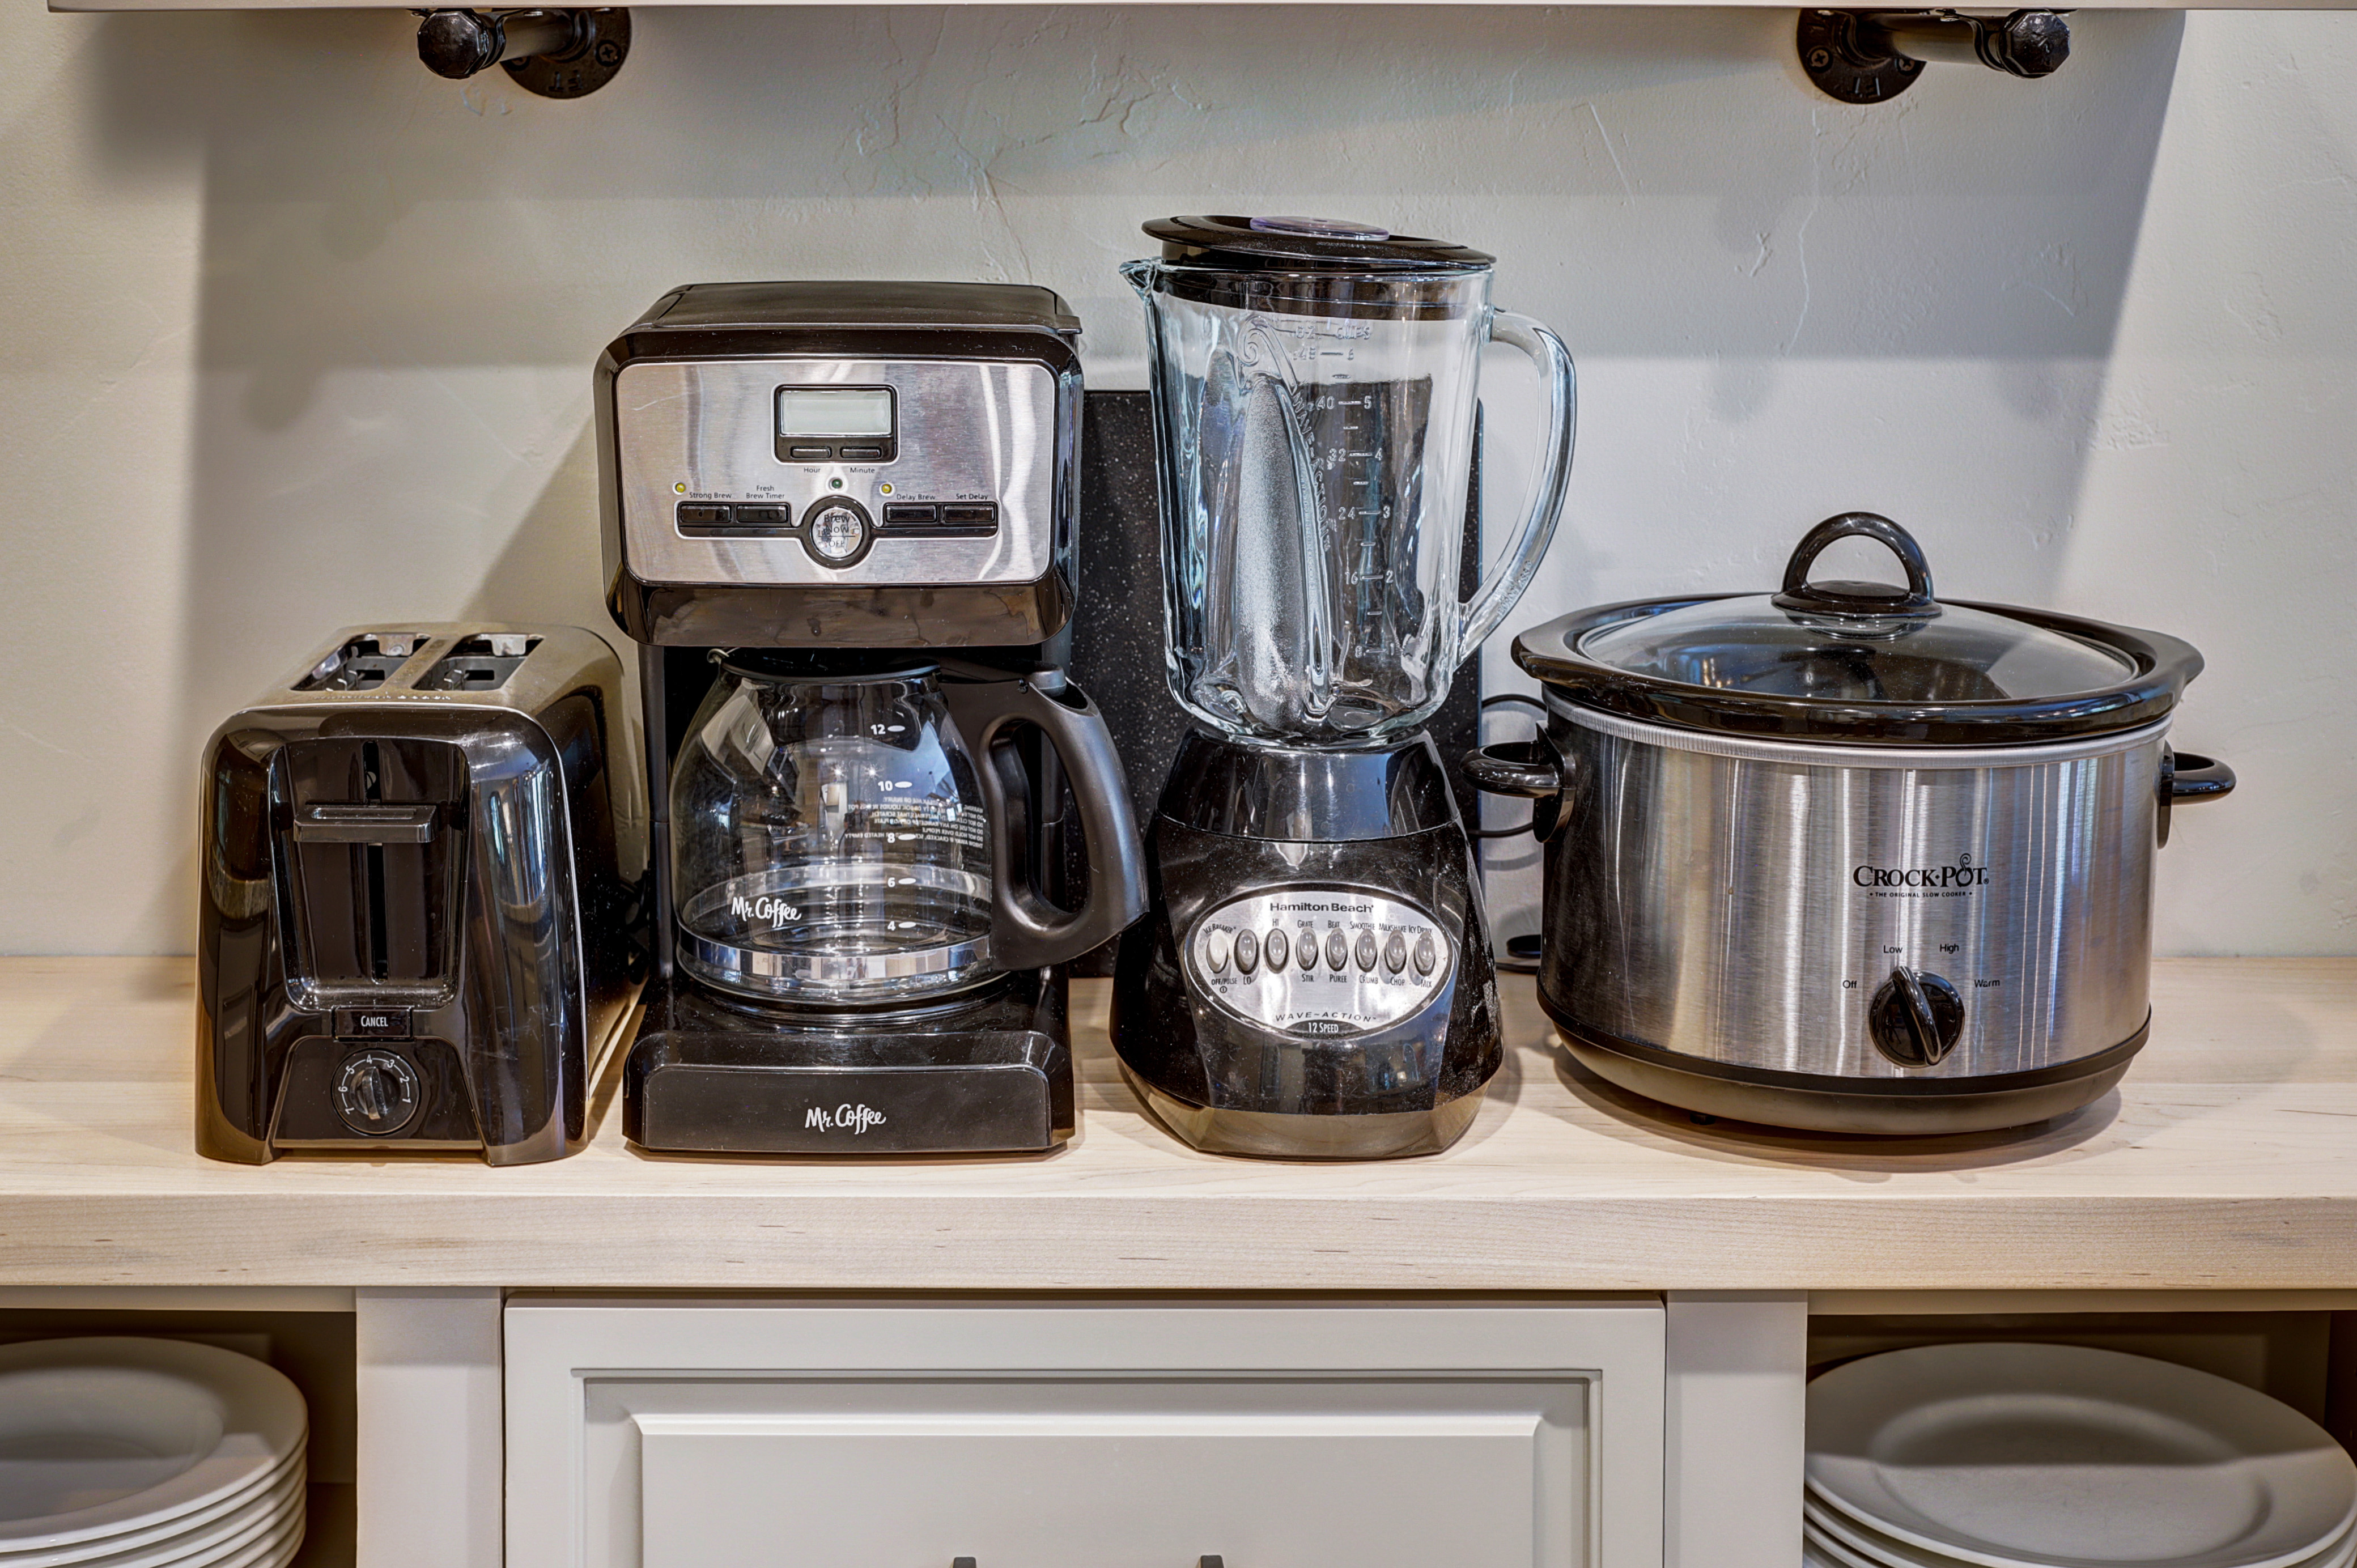 Small appliances include a 12 cup coffee maker, toaster, blender and slow cooker